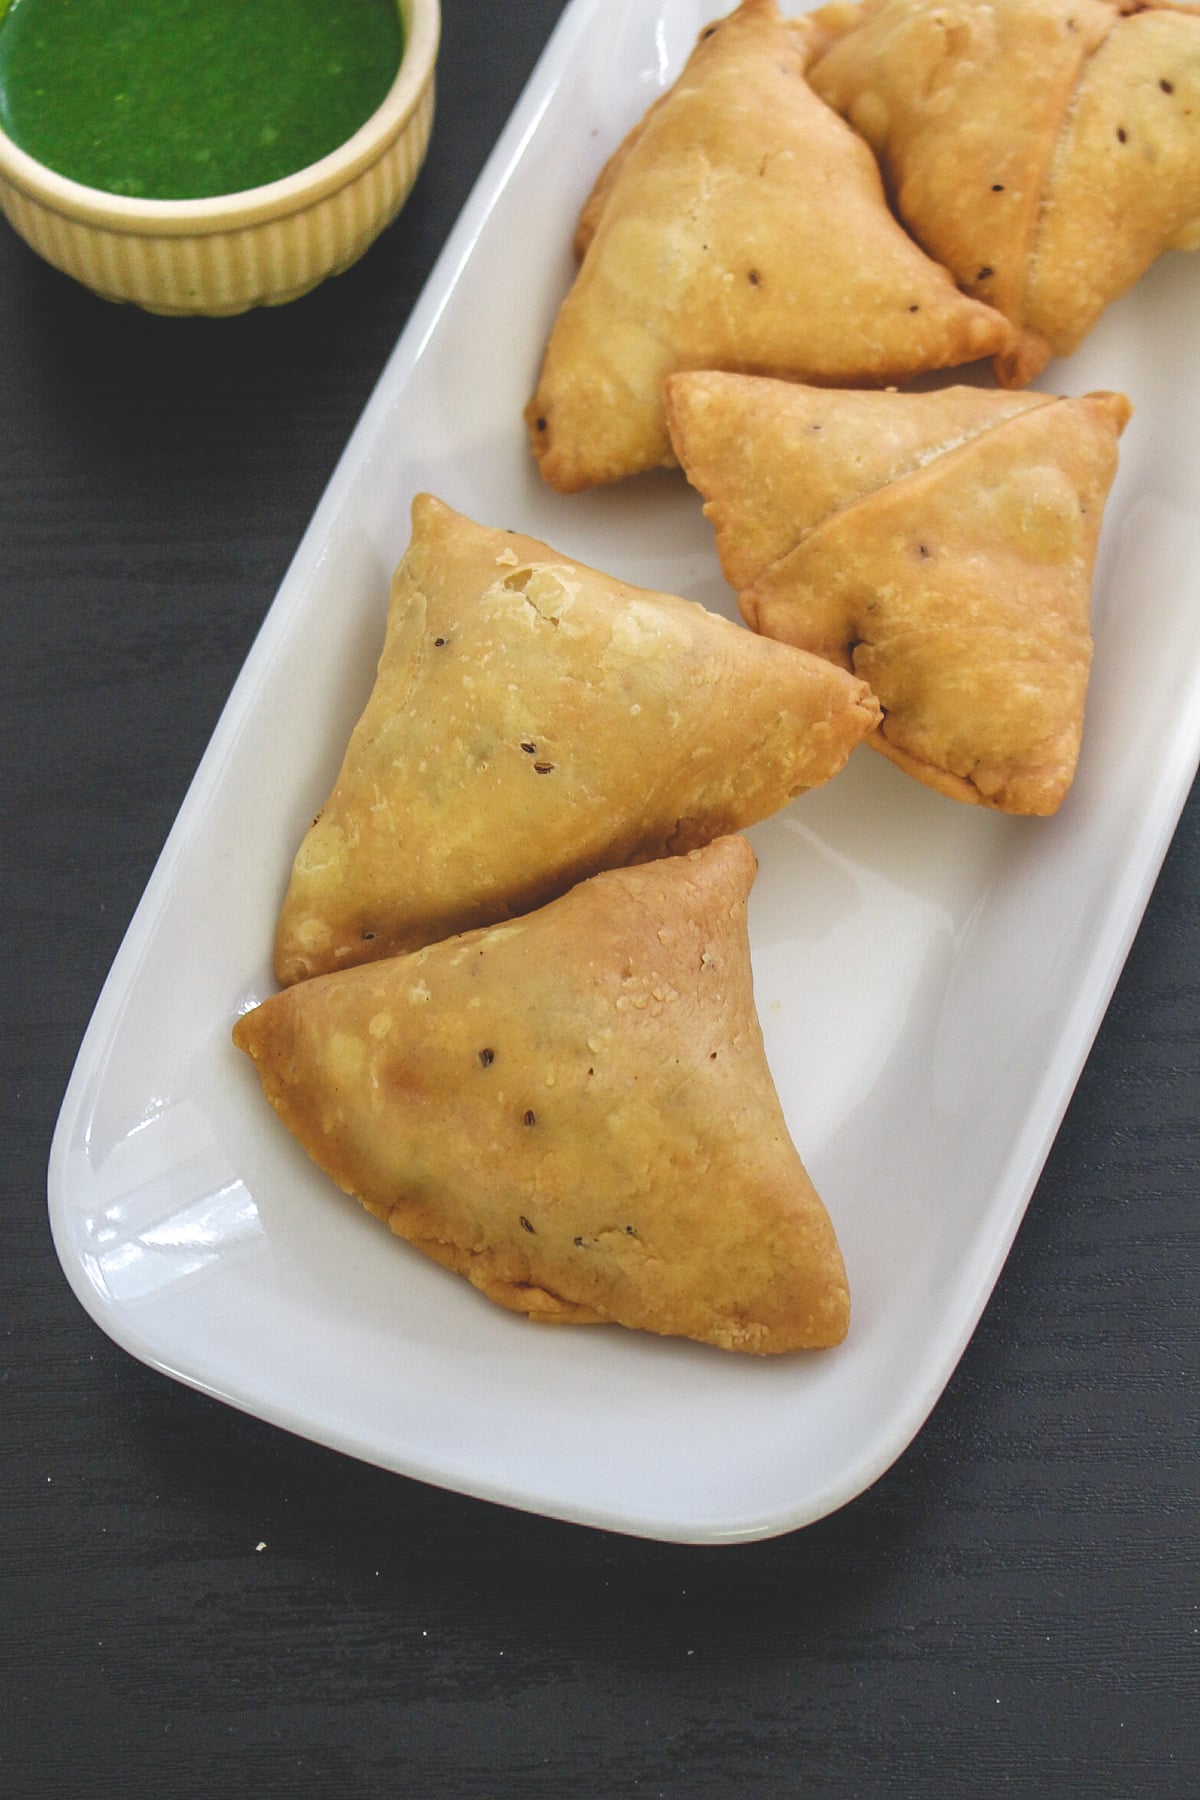 5 aloo samosa in a plate with a small bowl of green chutney.